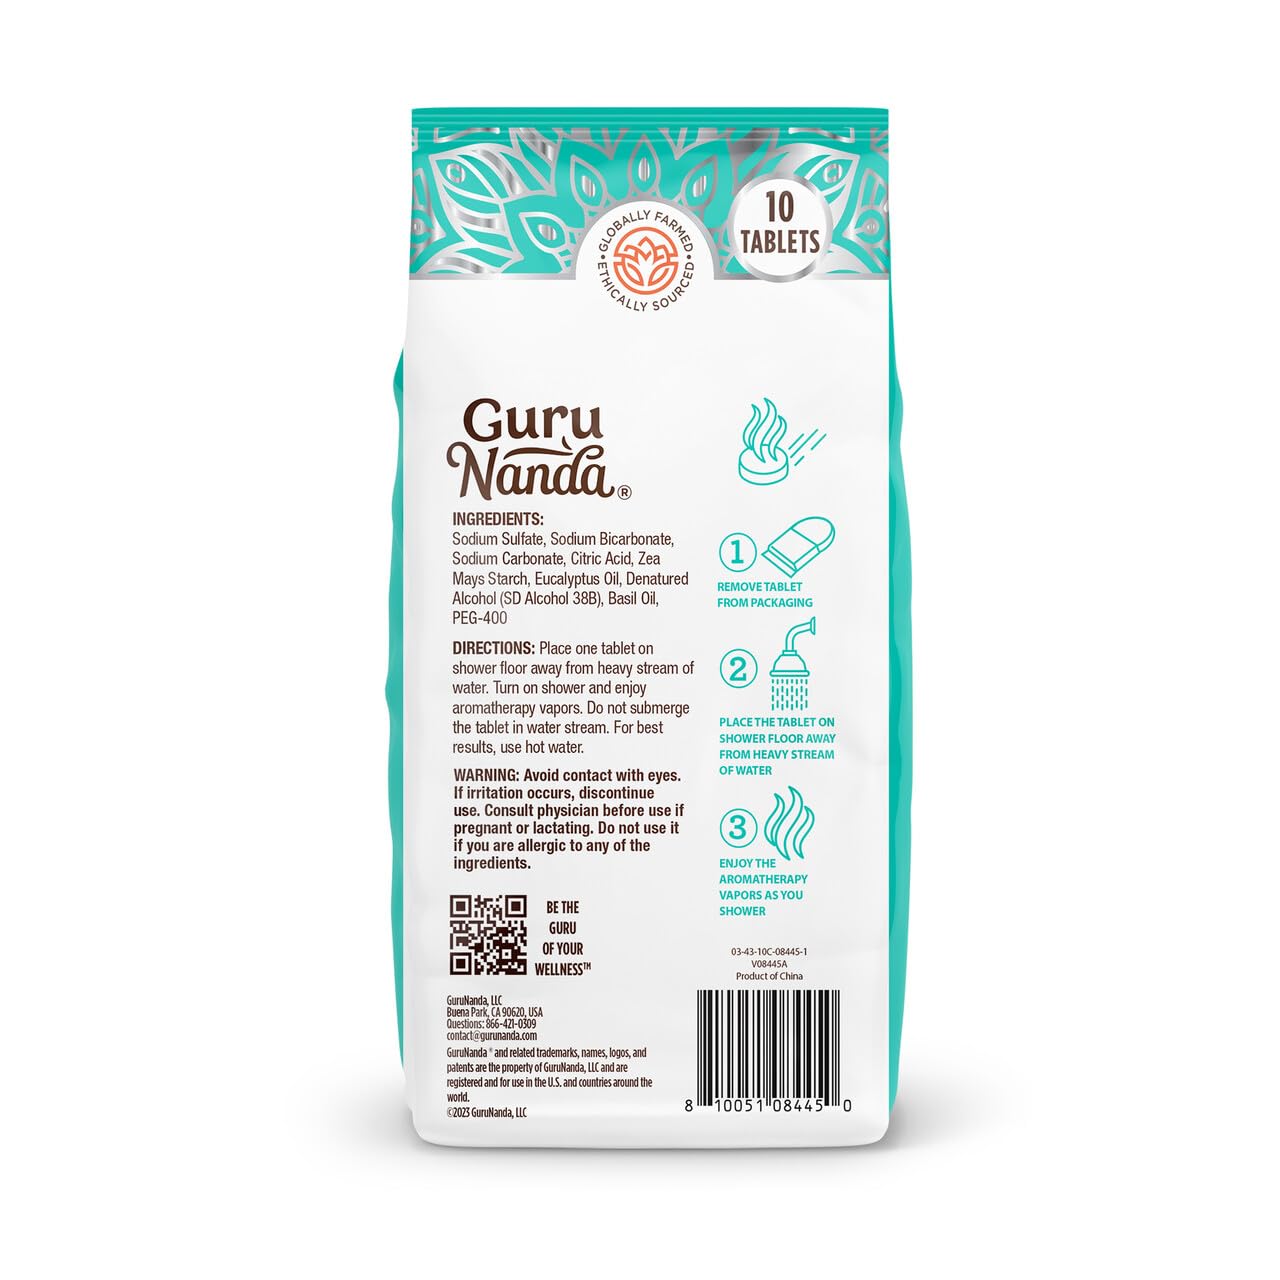 GuruNanda Breathe Shower Steamer Tablets (Pack of 10) - 100% Natural Eucalyptus Essential Oil helps with Congestion and Basil Supports Stress Relief & Mental Clarity - Perfect for Home Spa & Self Care